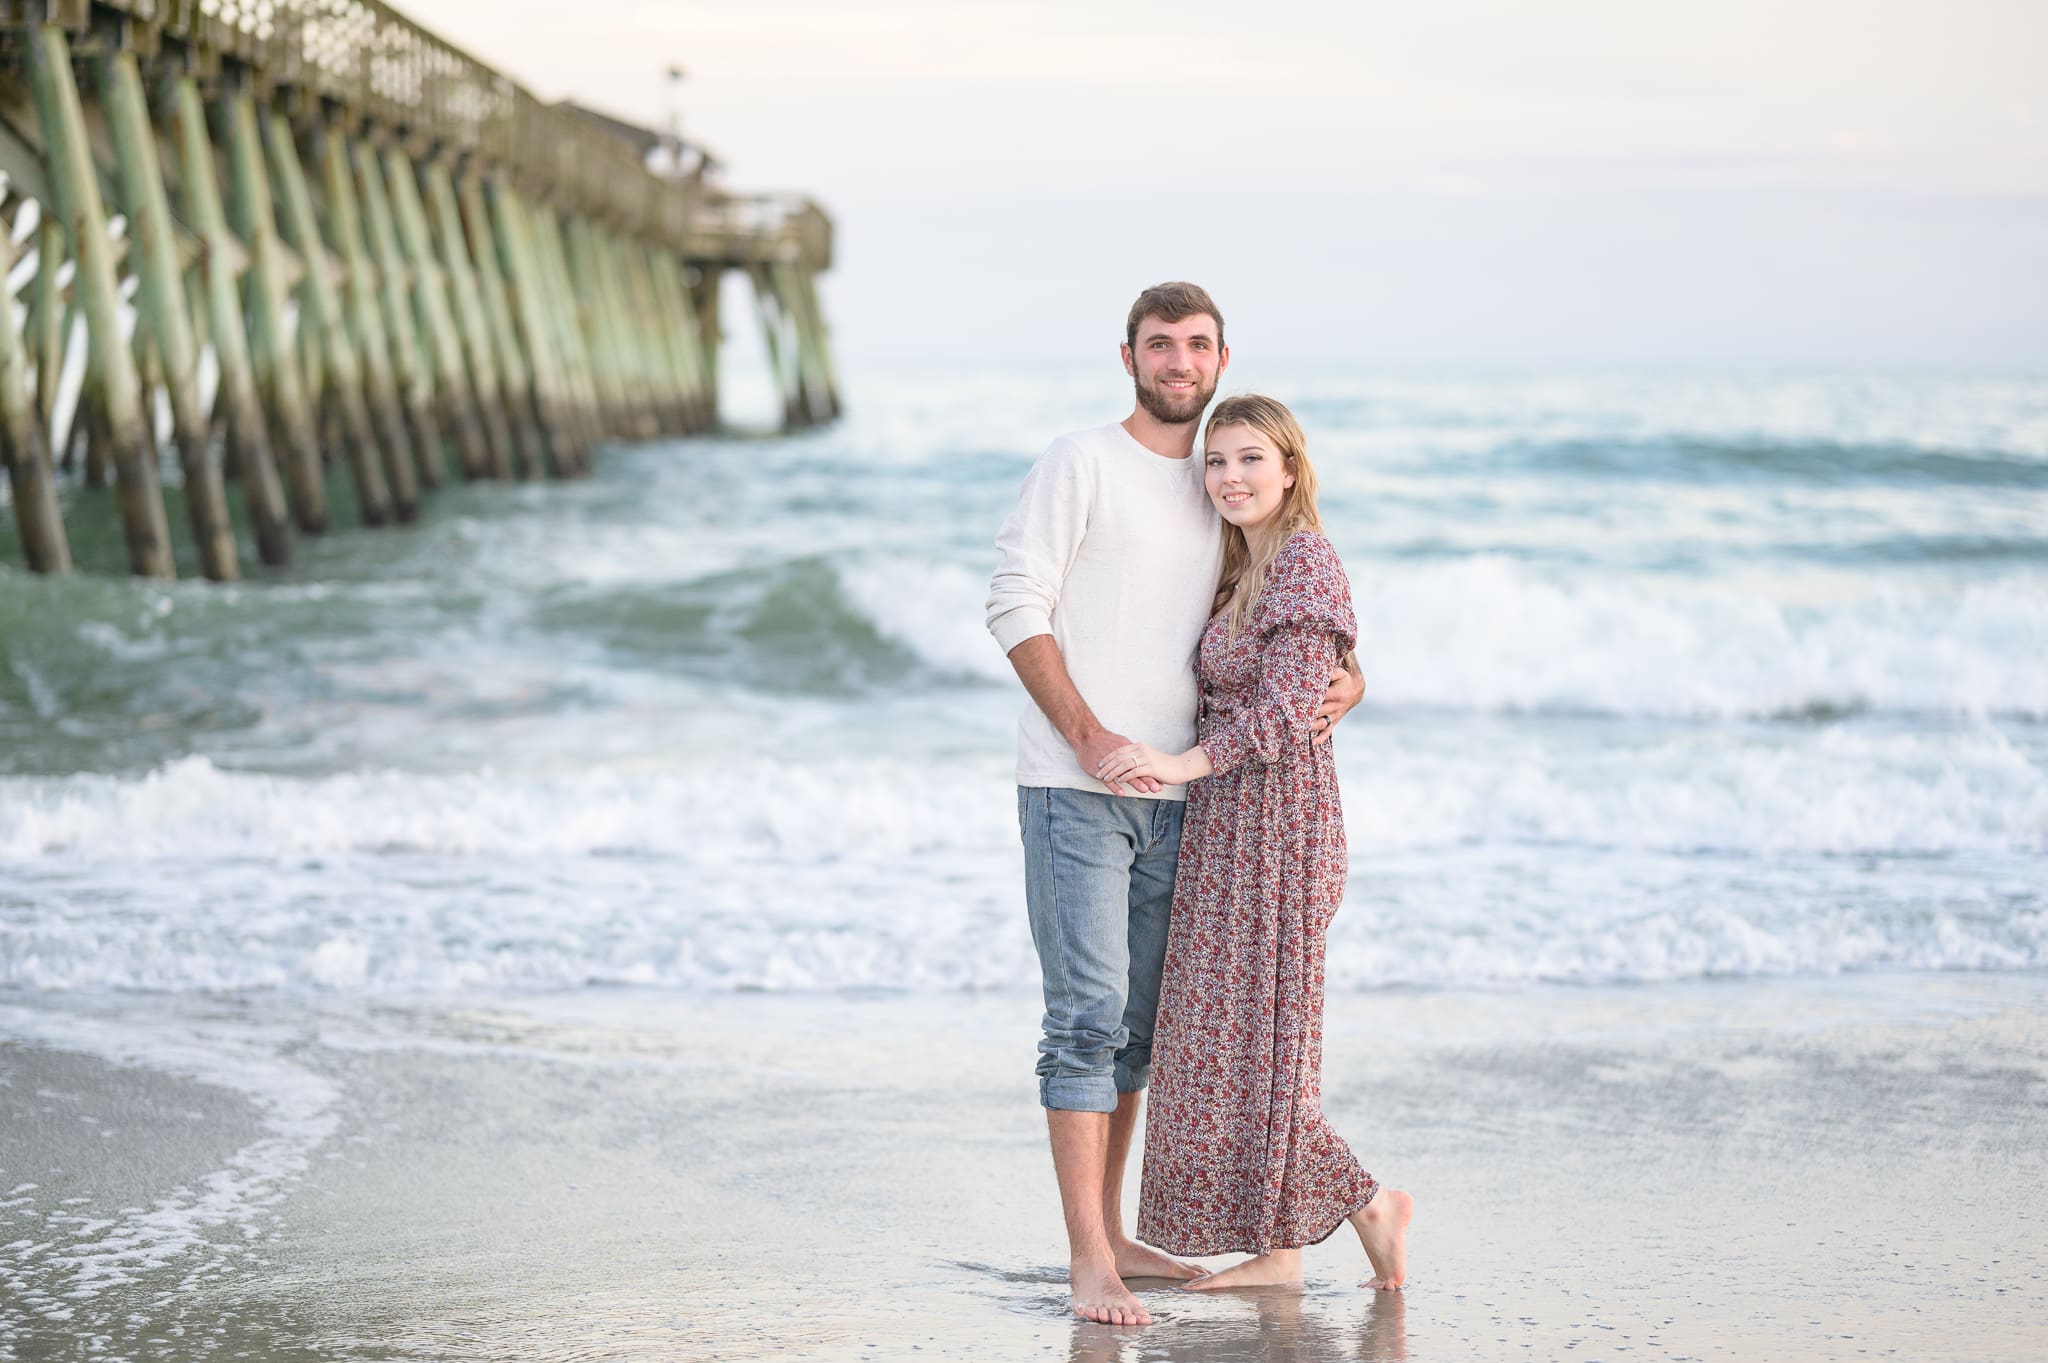 Holding hands by the pier - Myrtle Beach State Park